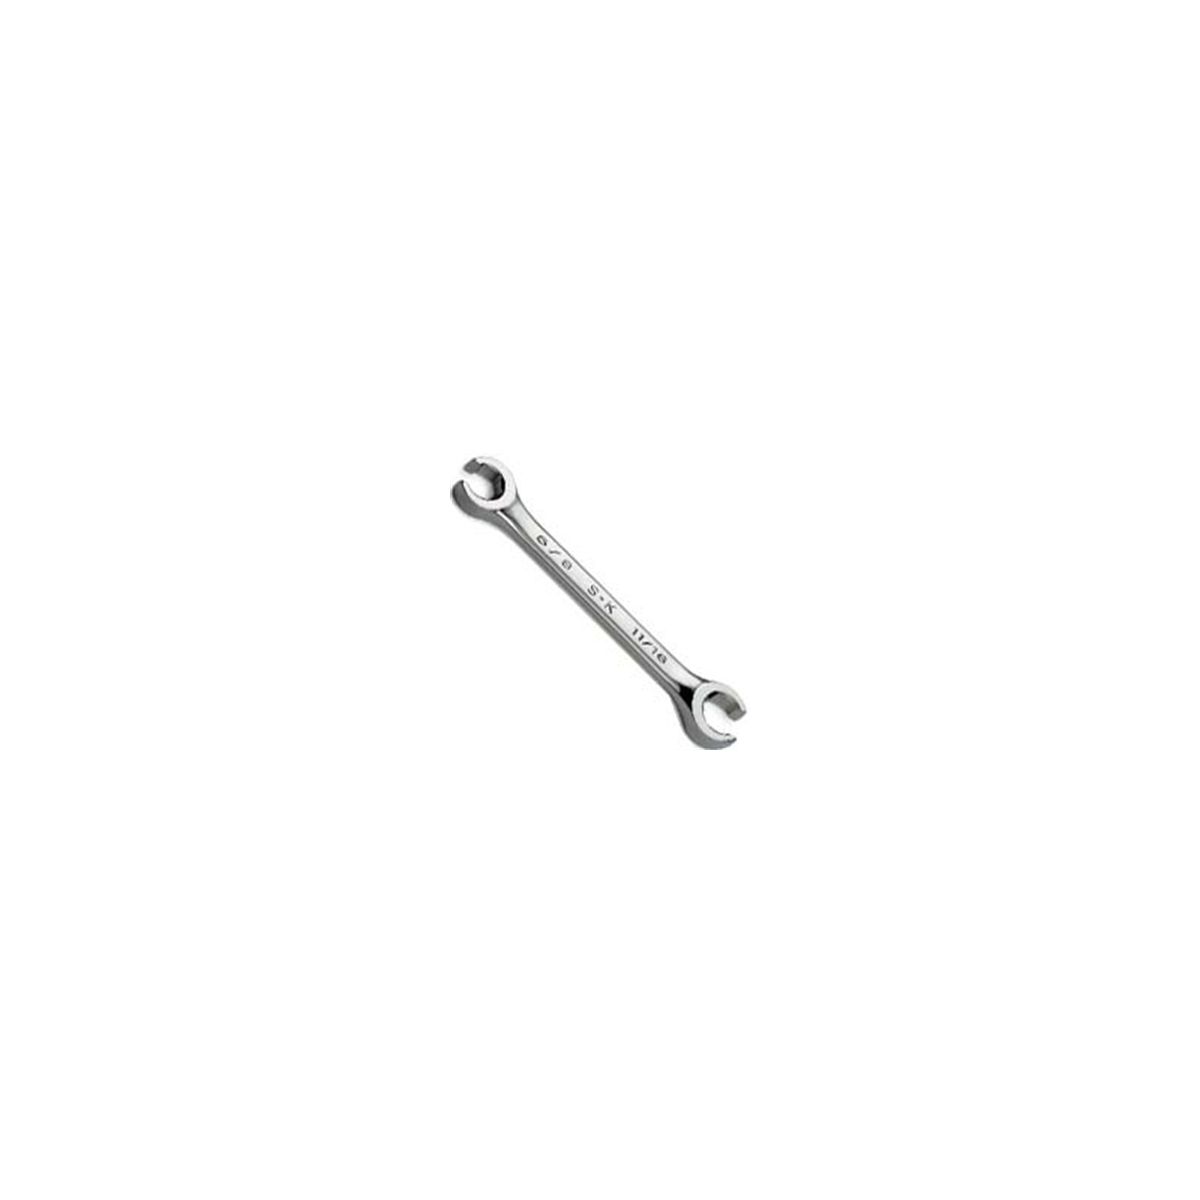 SuperKrome(R) Standard Flare Nut Wrench - 3/8 In x 7/16 In